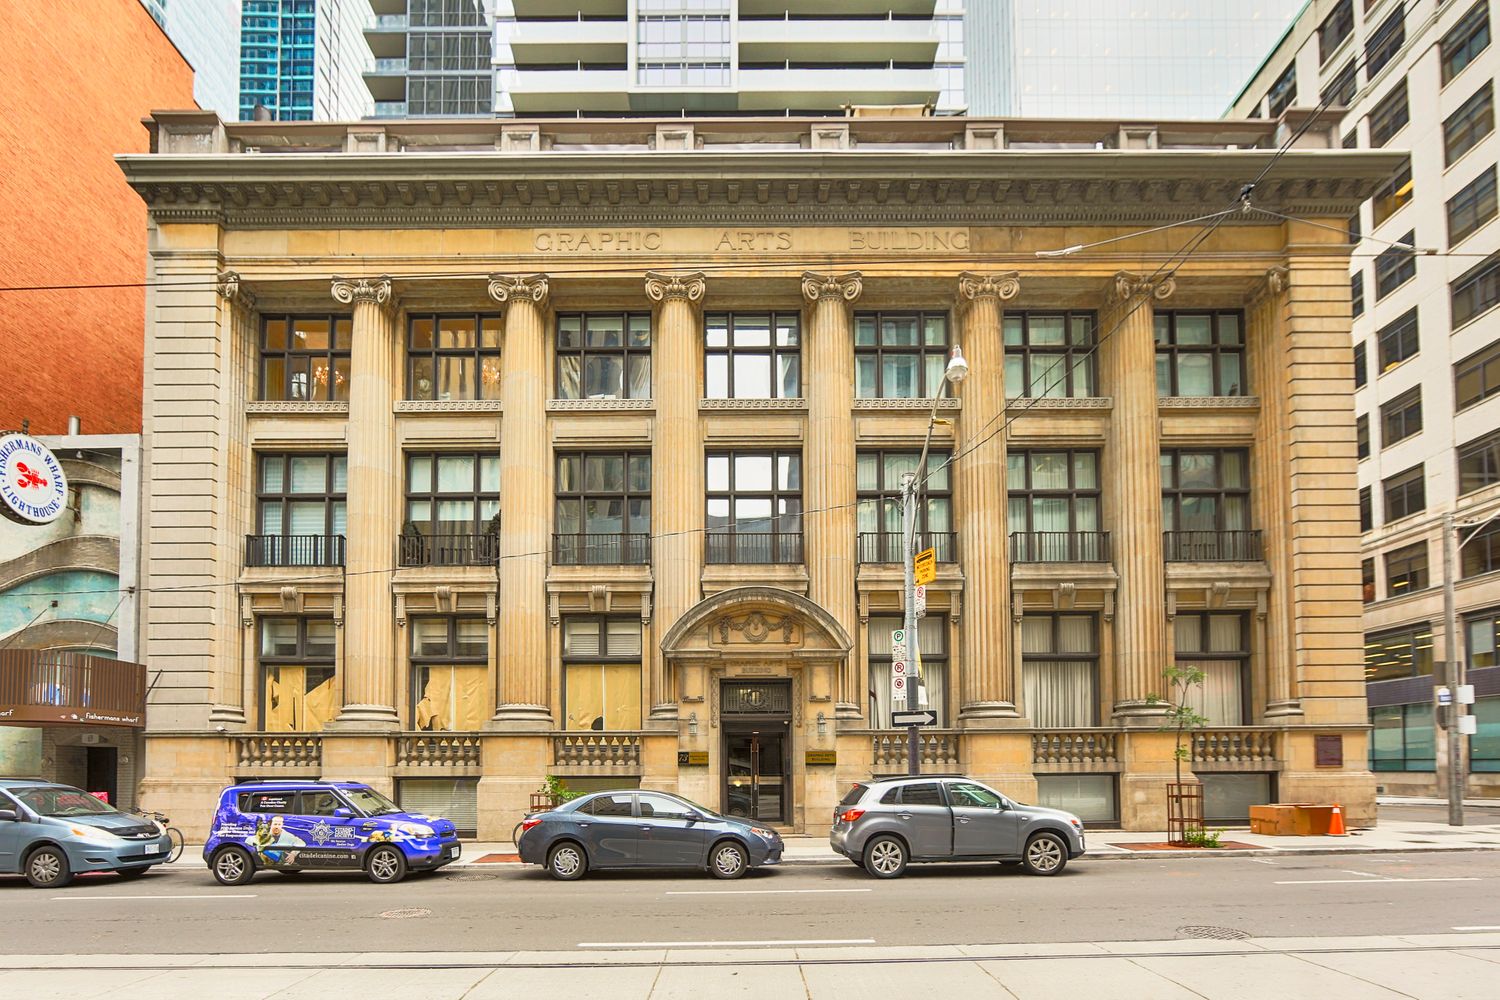 73 Richmond Street W. Graphic Arts Building is located in  Downtown, Toronto - image #2 of 5